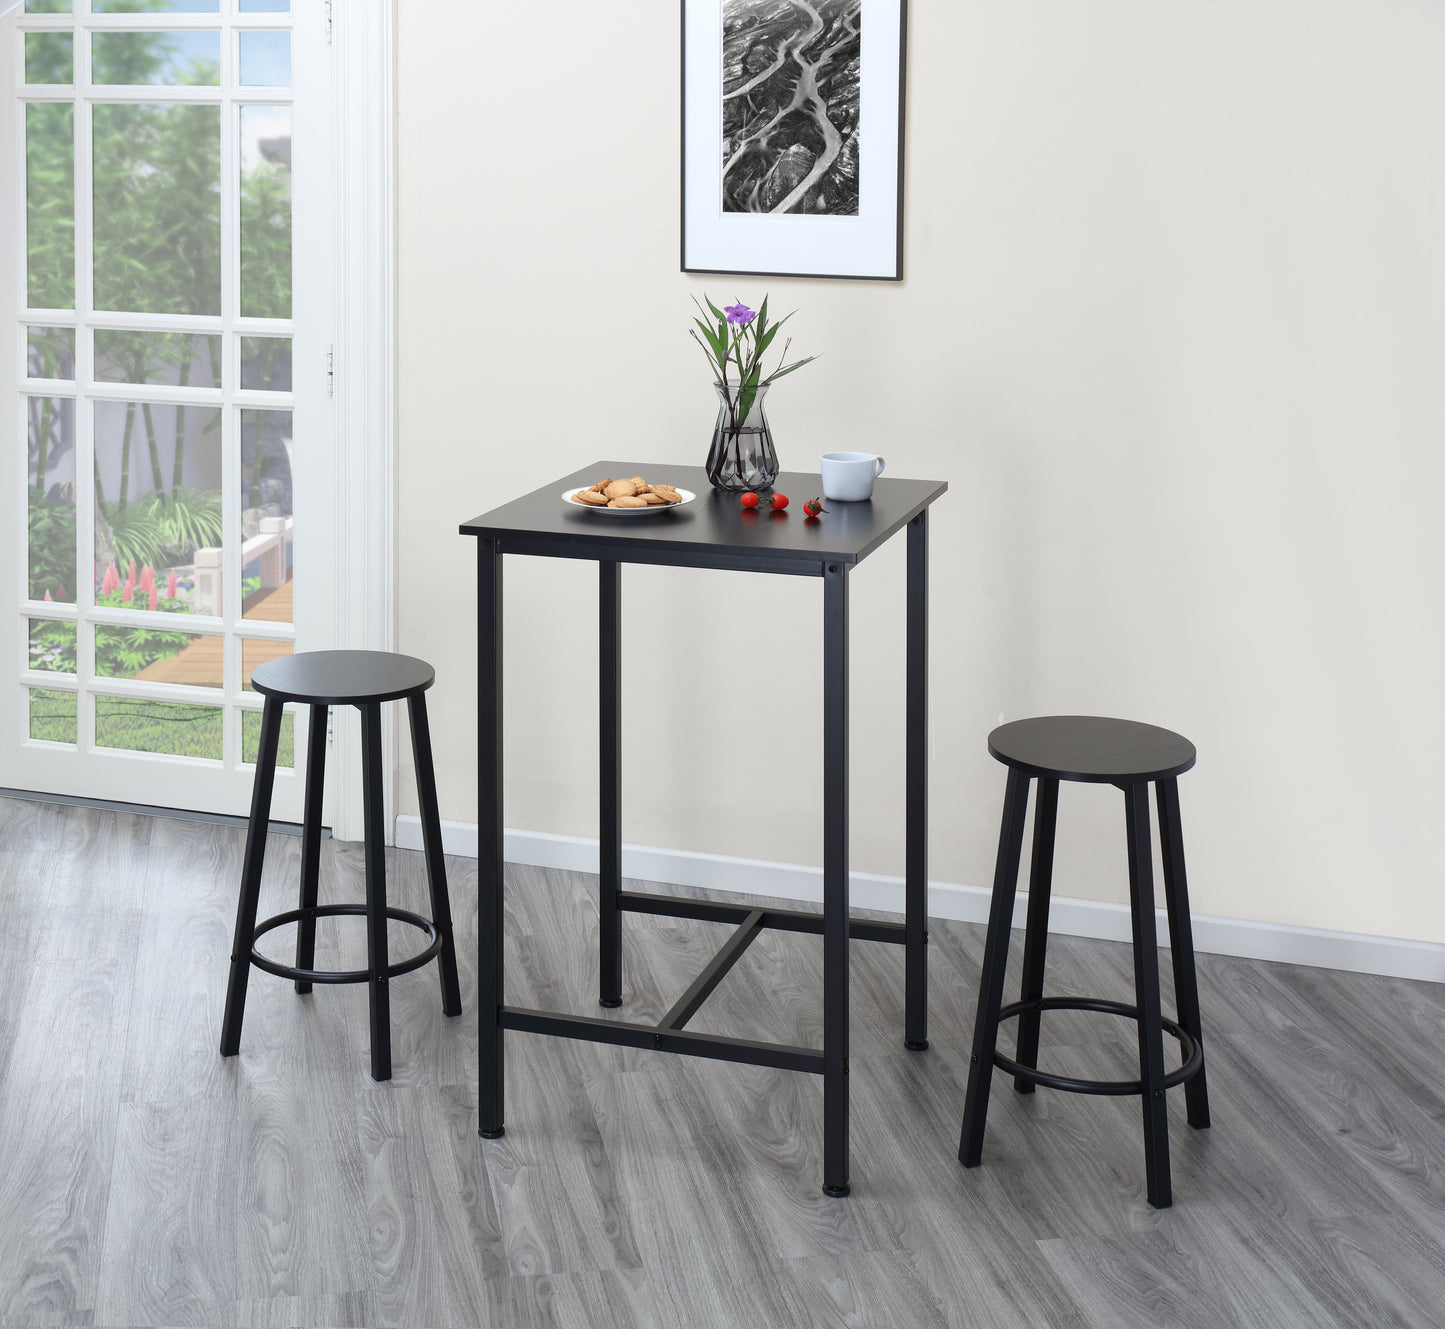 Finnhomy Bar Table Set, 23.6" Pub Table High Top Table, Square Bar Height Table, Bar Table with Stools, Kitchen Table Set for 2, Industrial Breakfast for Kitchen, Living Room, Rustic Black，F20TBBTSSH7263